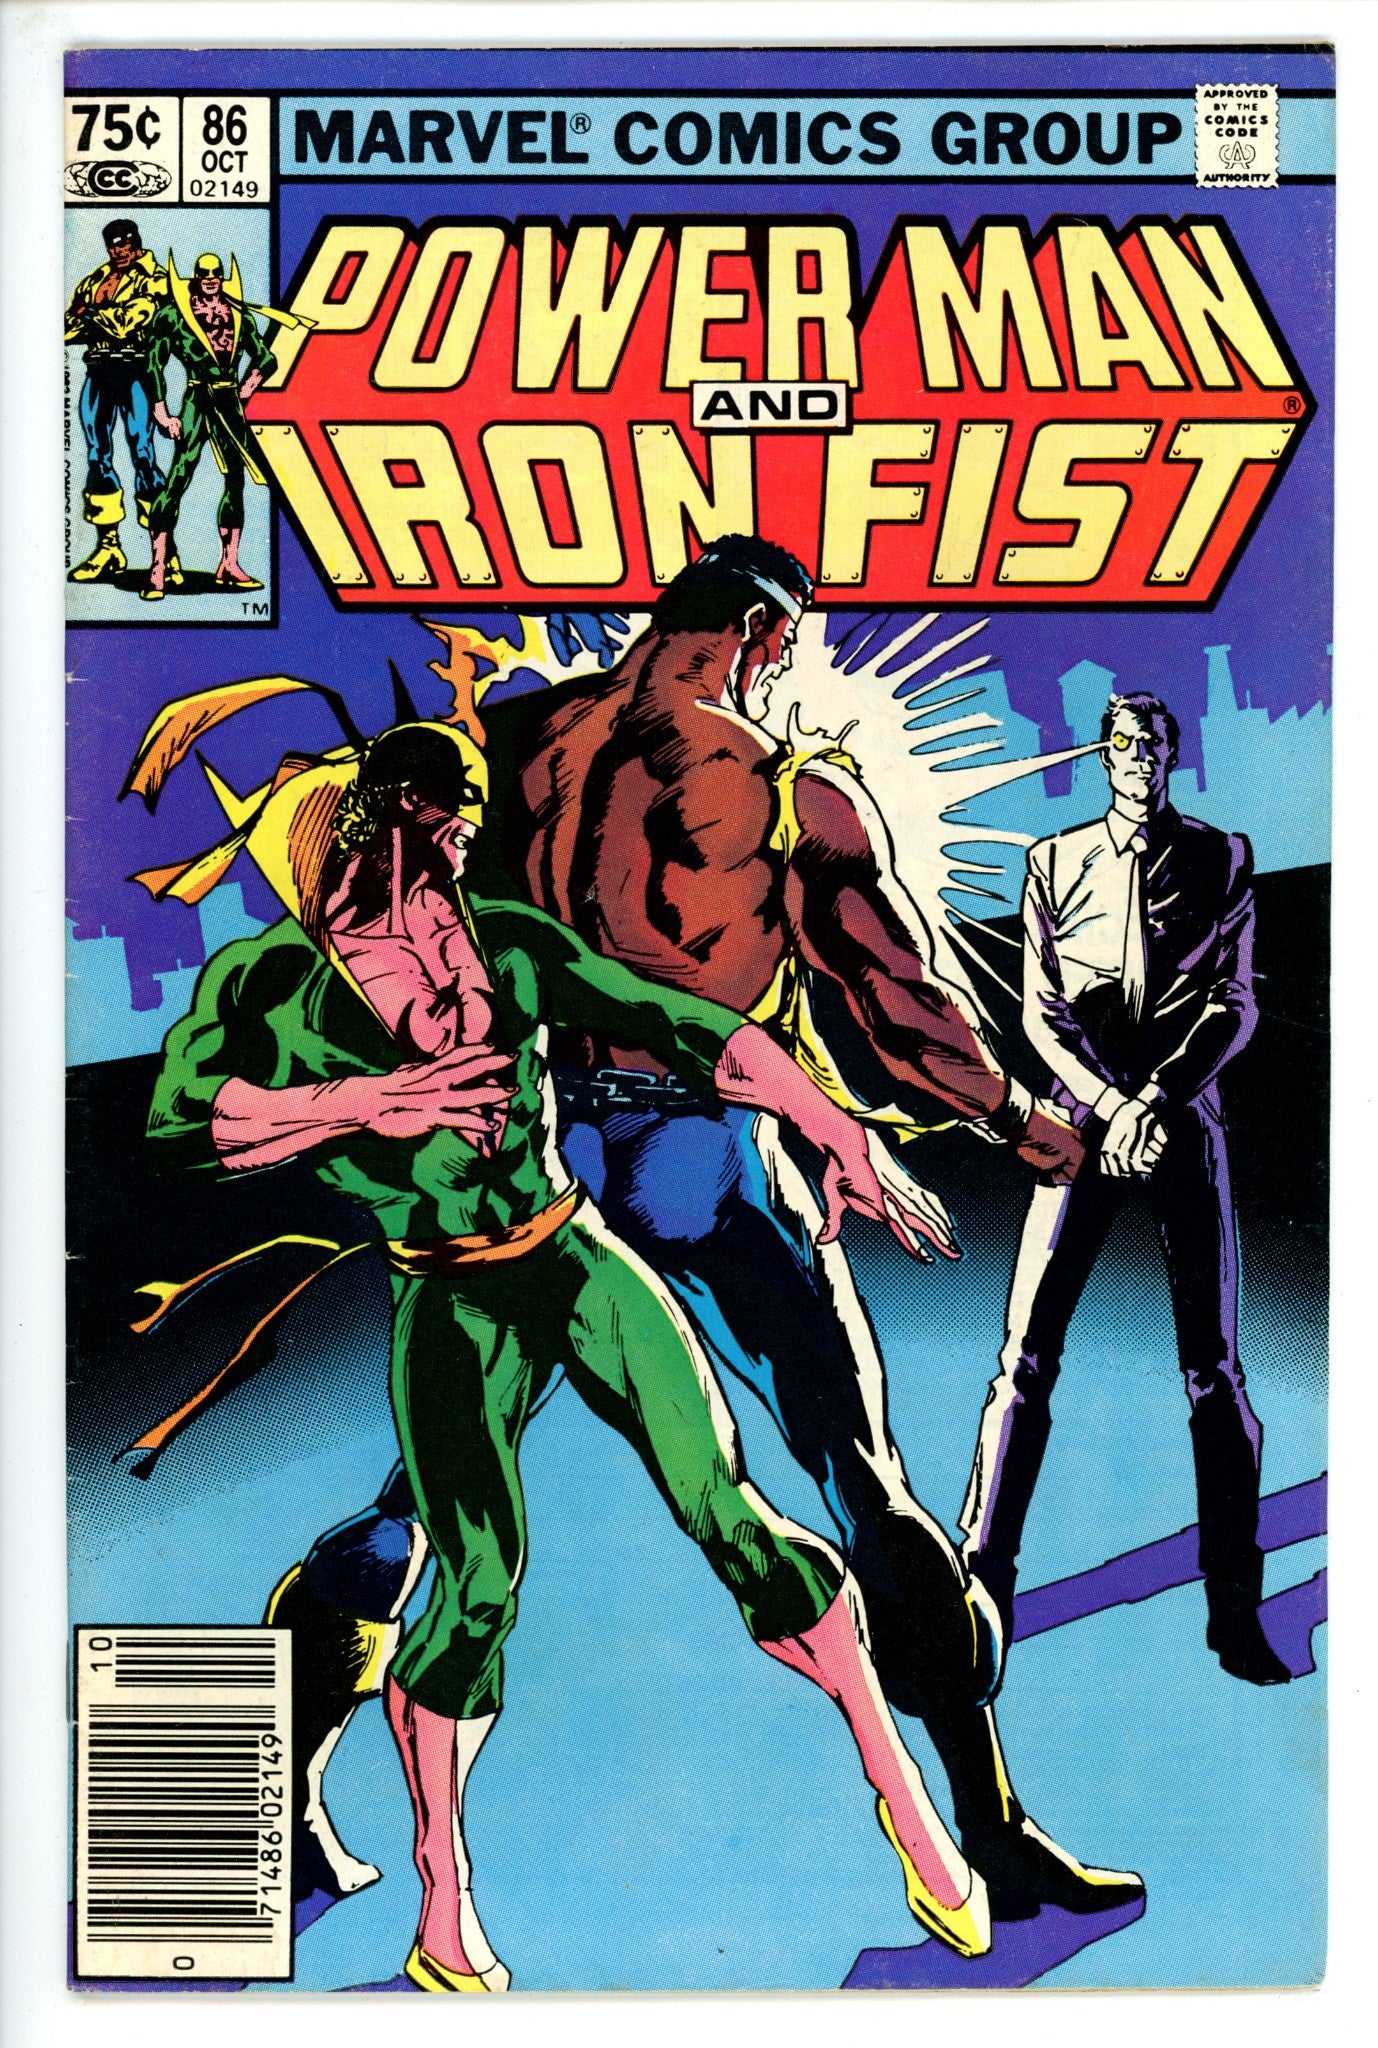 Power Man and Iron Fist Vol 1 86 Canadian